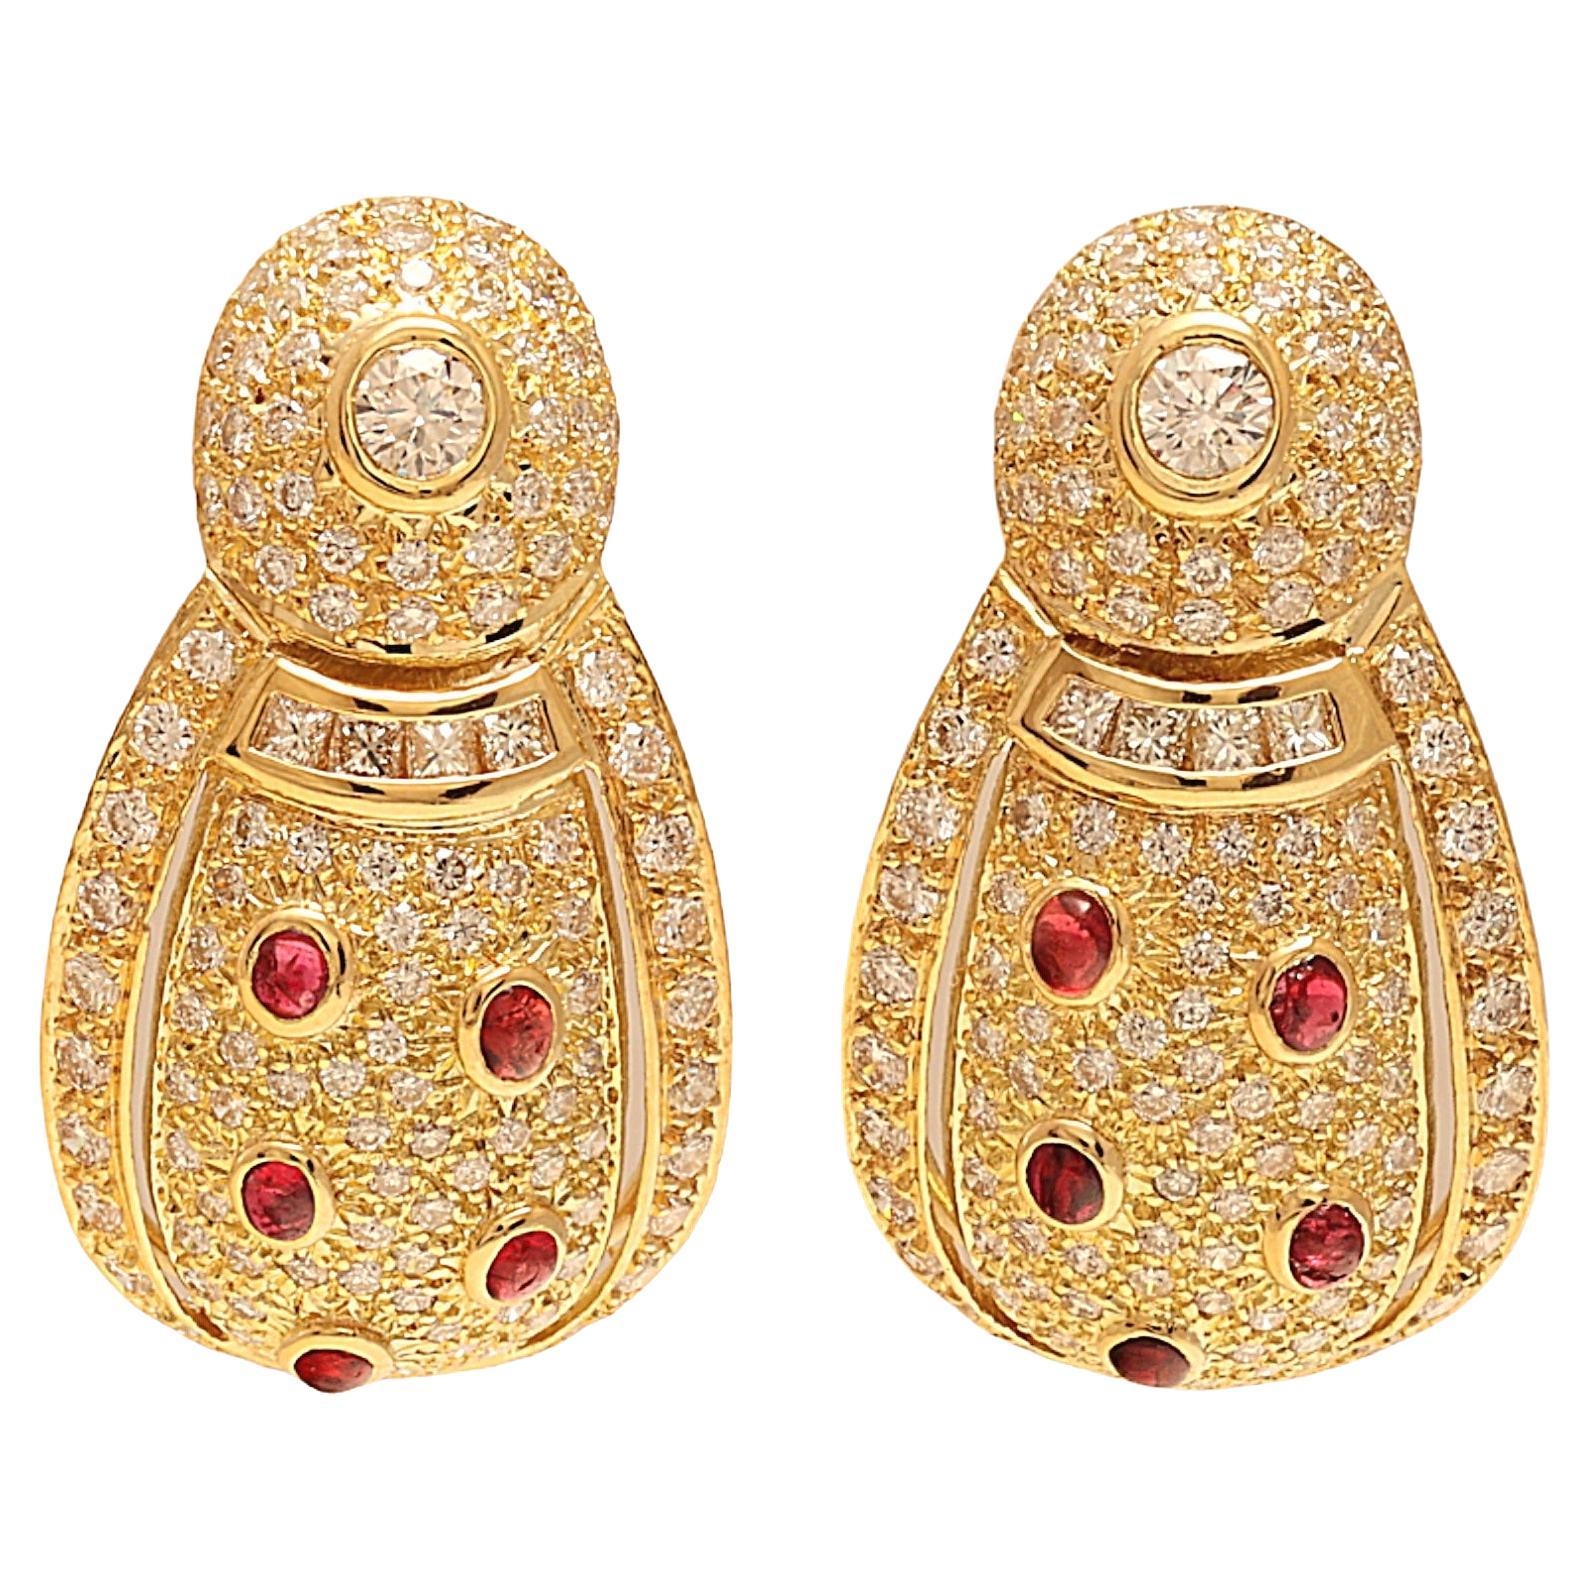 18 kt. Yellow Gold Earrings, Possibly Depicting a Lady Bird with Diamonds & Ruby